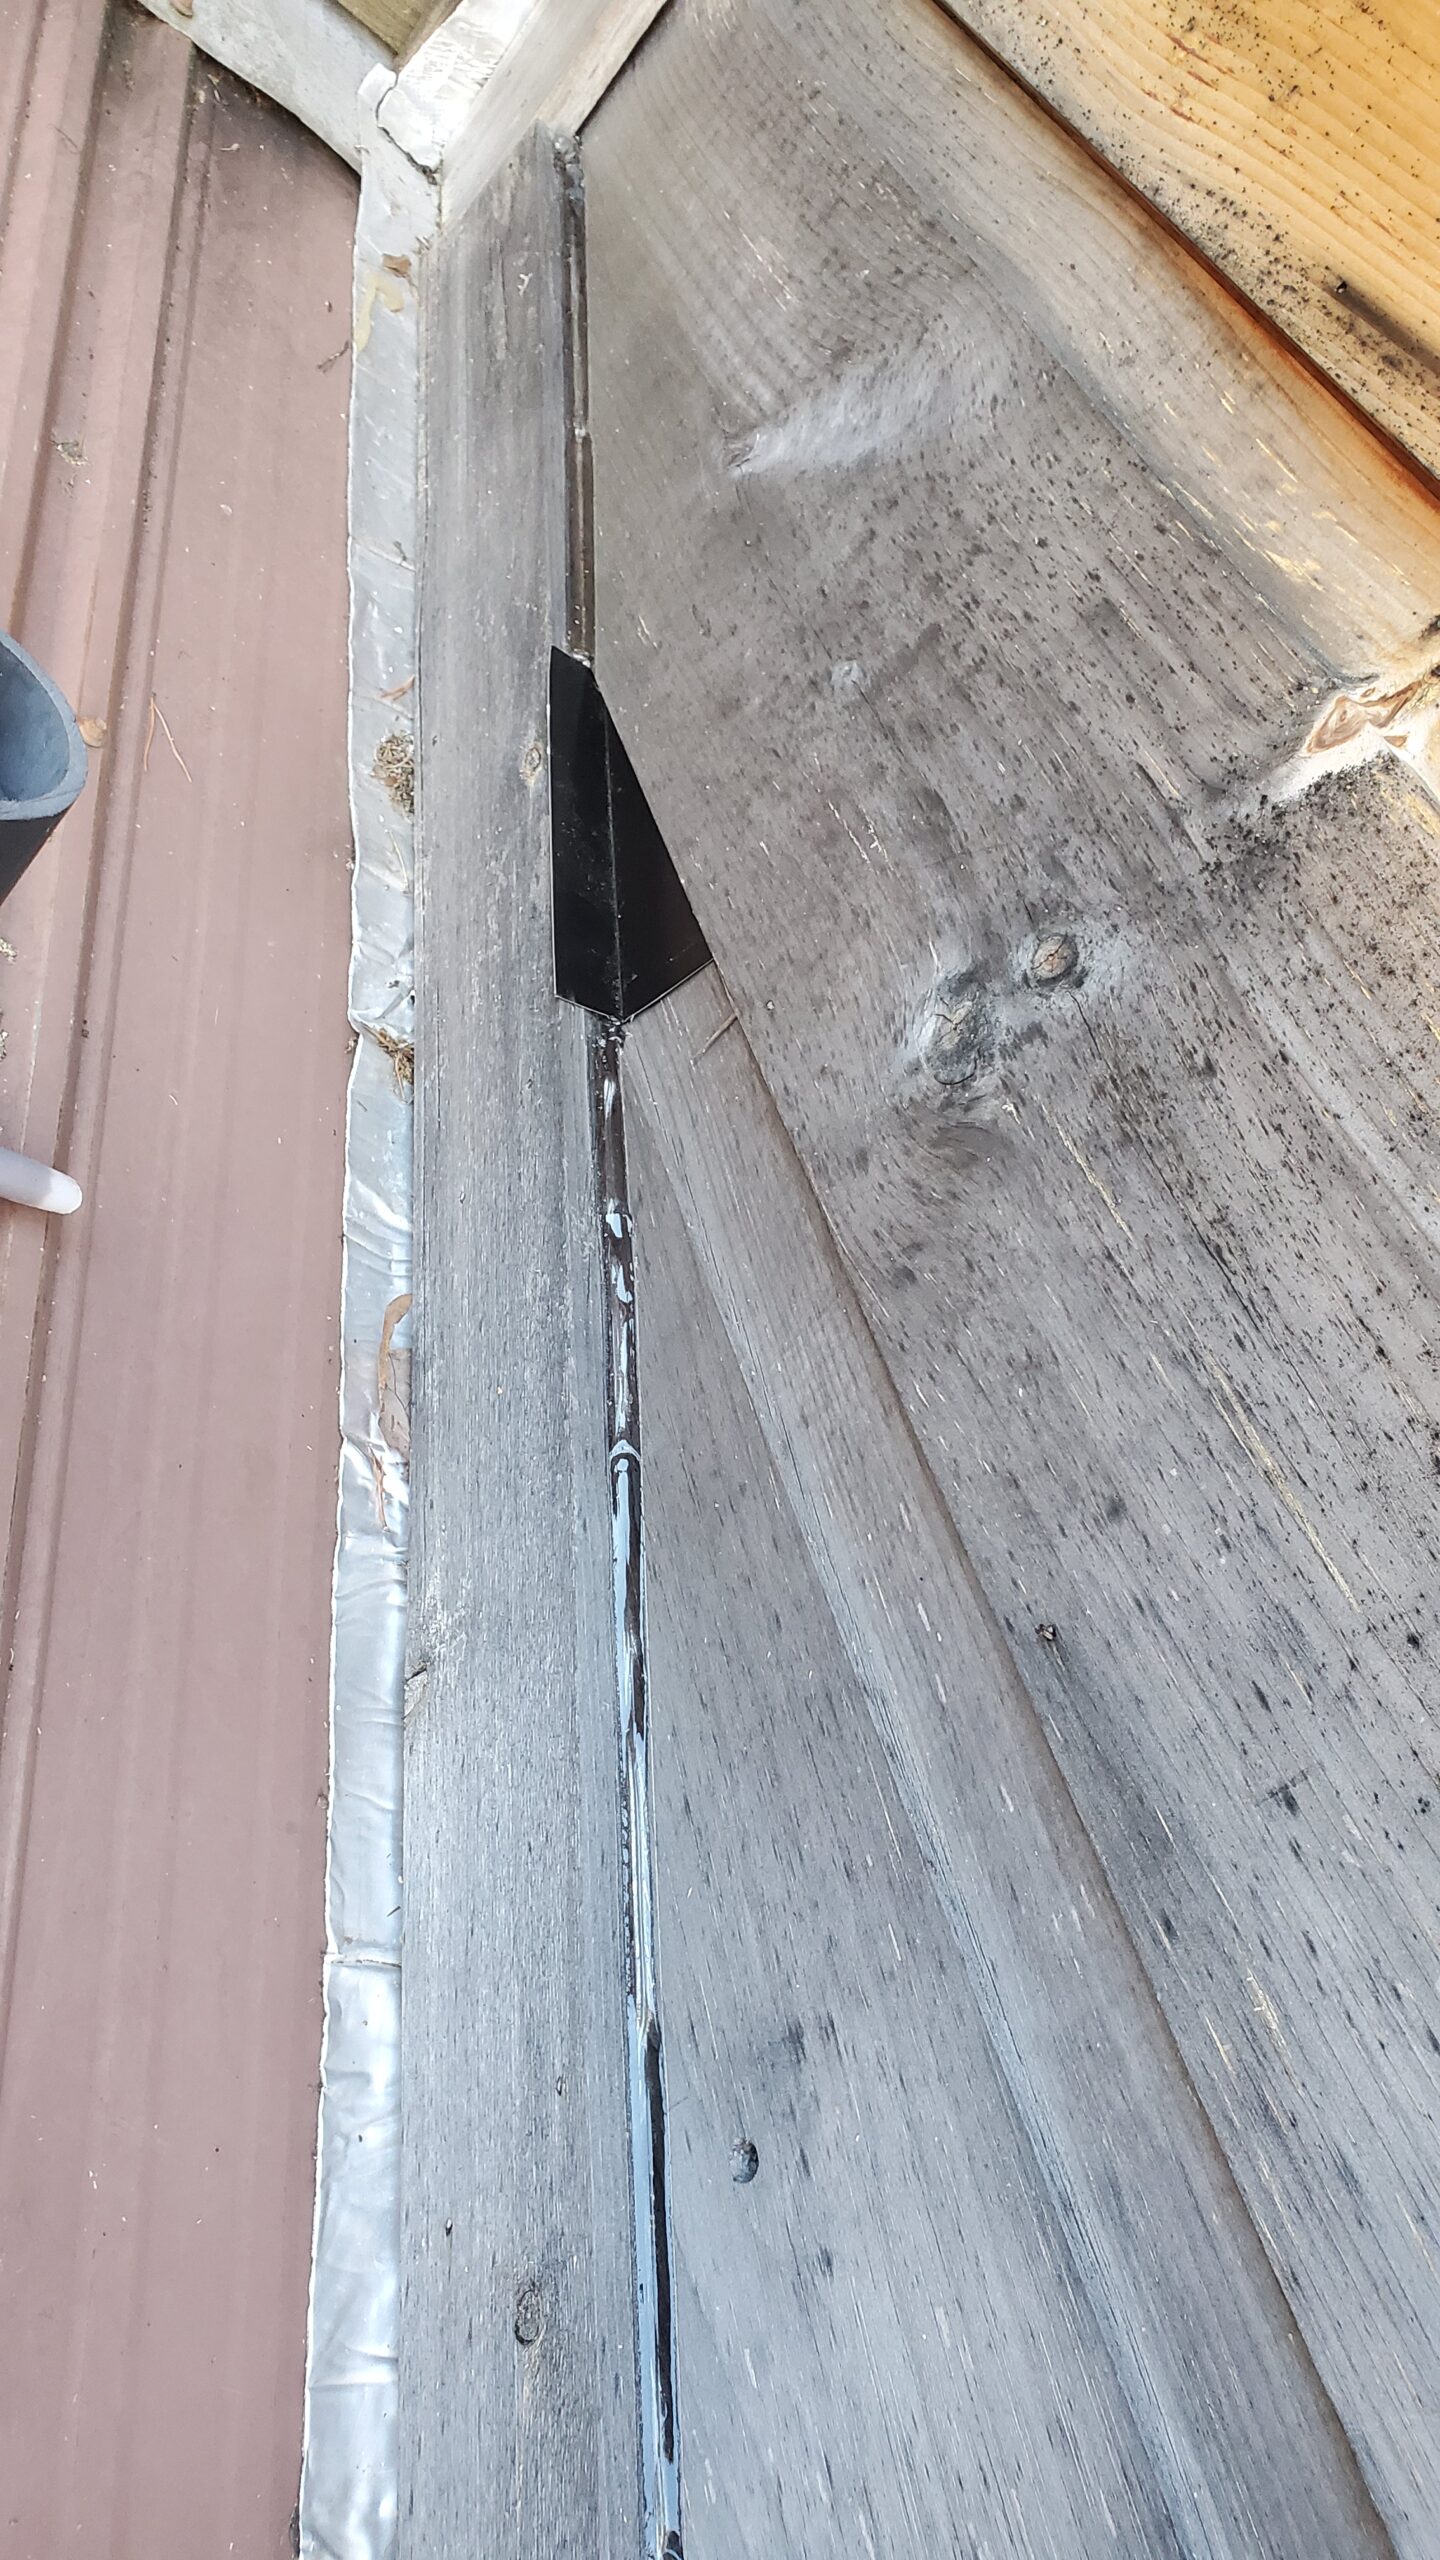 This is a picture of a piece of triangular metal flashing between two pieces of wooden siding 